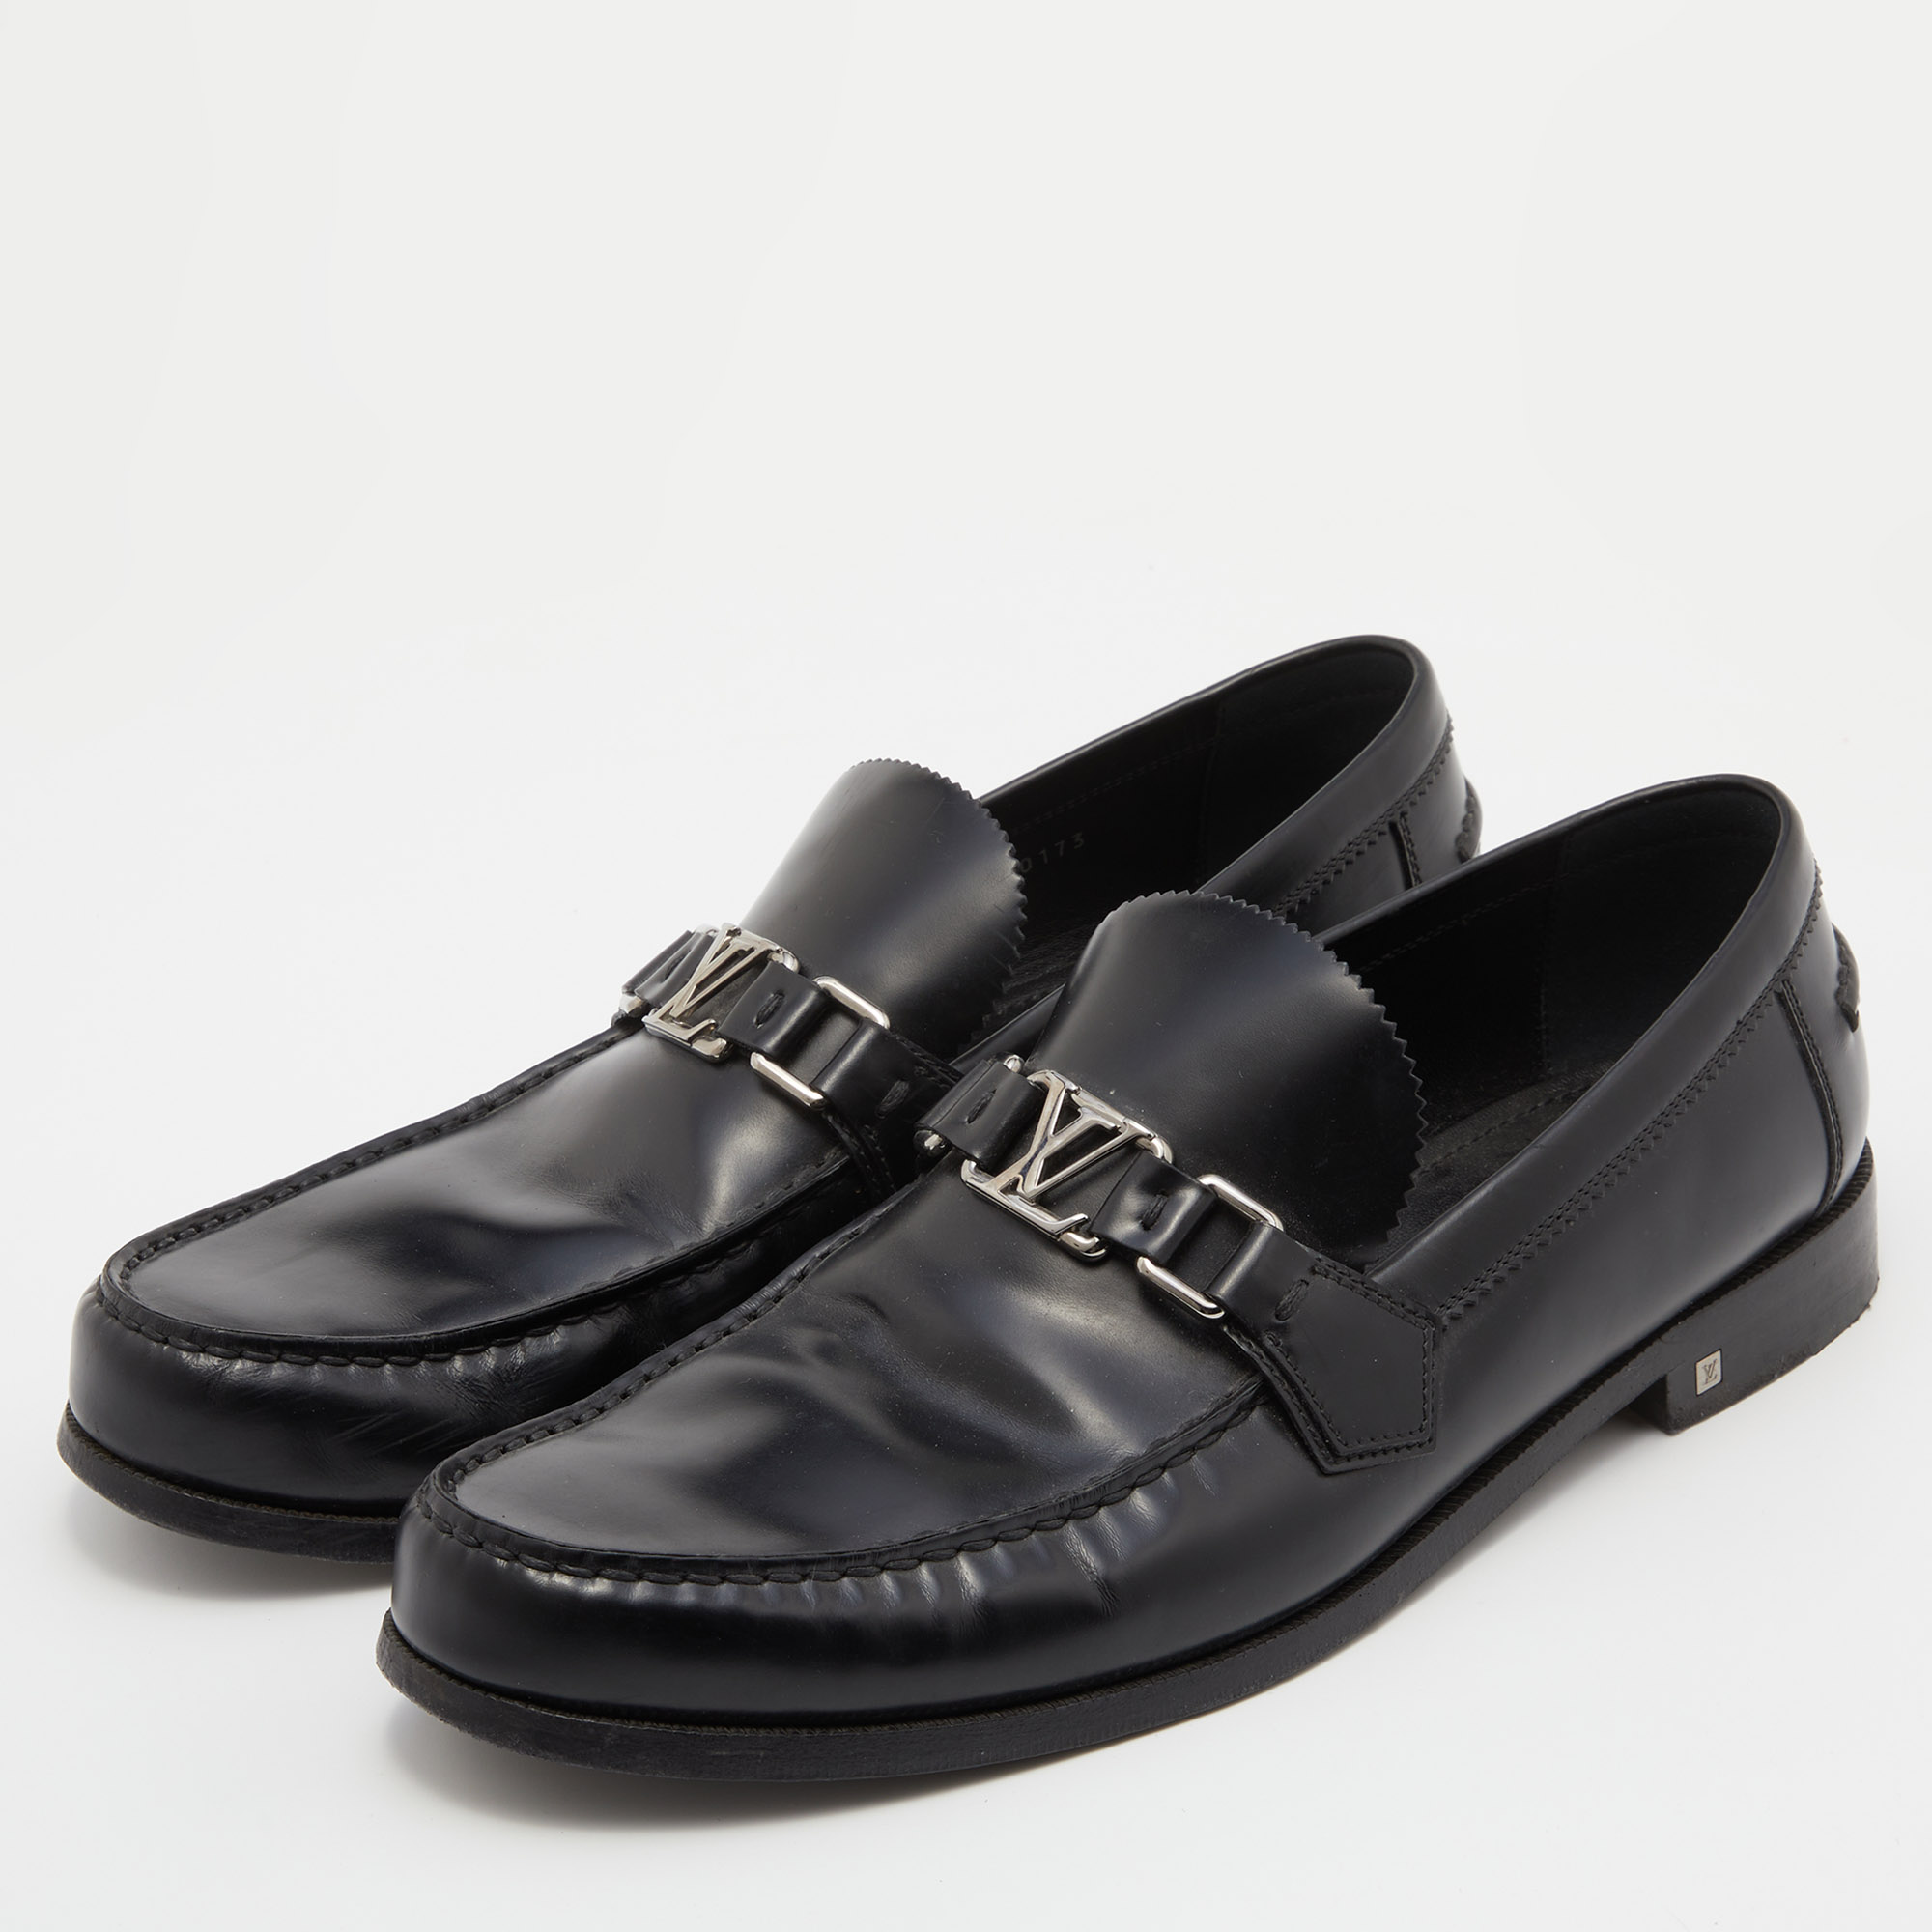 

Louis Vuitton Black Leather Major Slip On Loafers Size